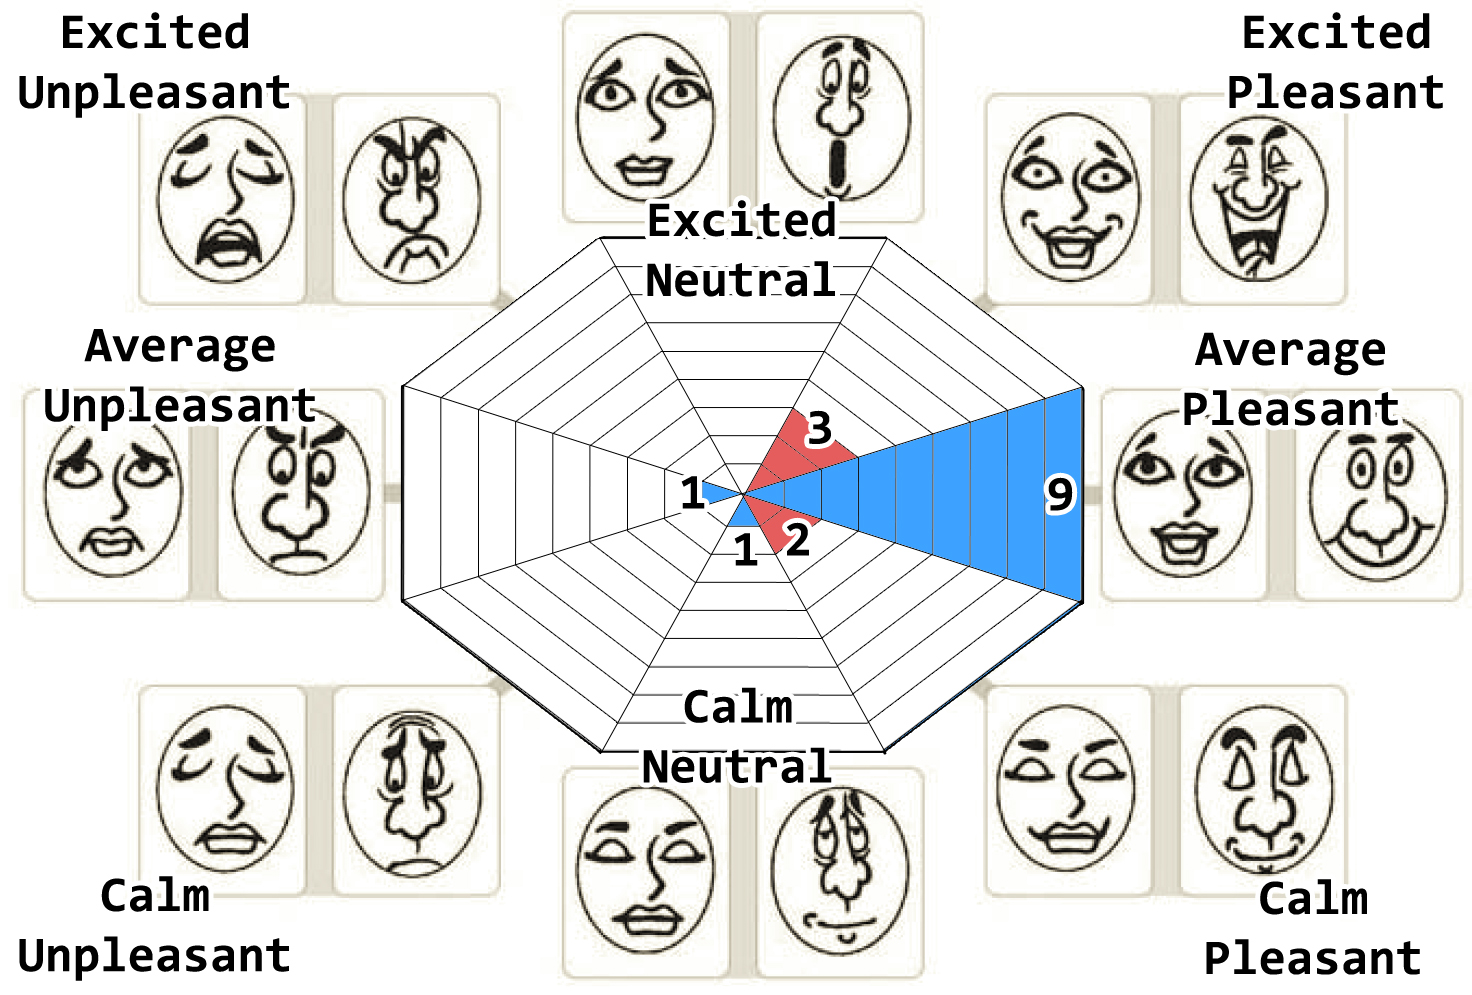  Figure 4: The emotional response of participants of the test group